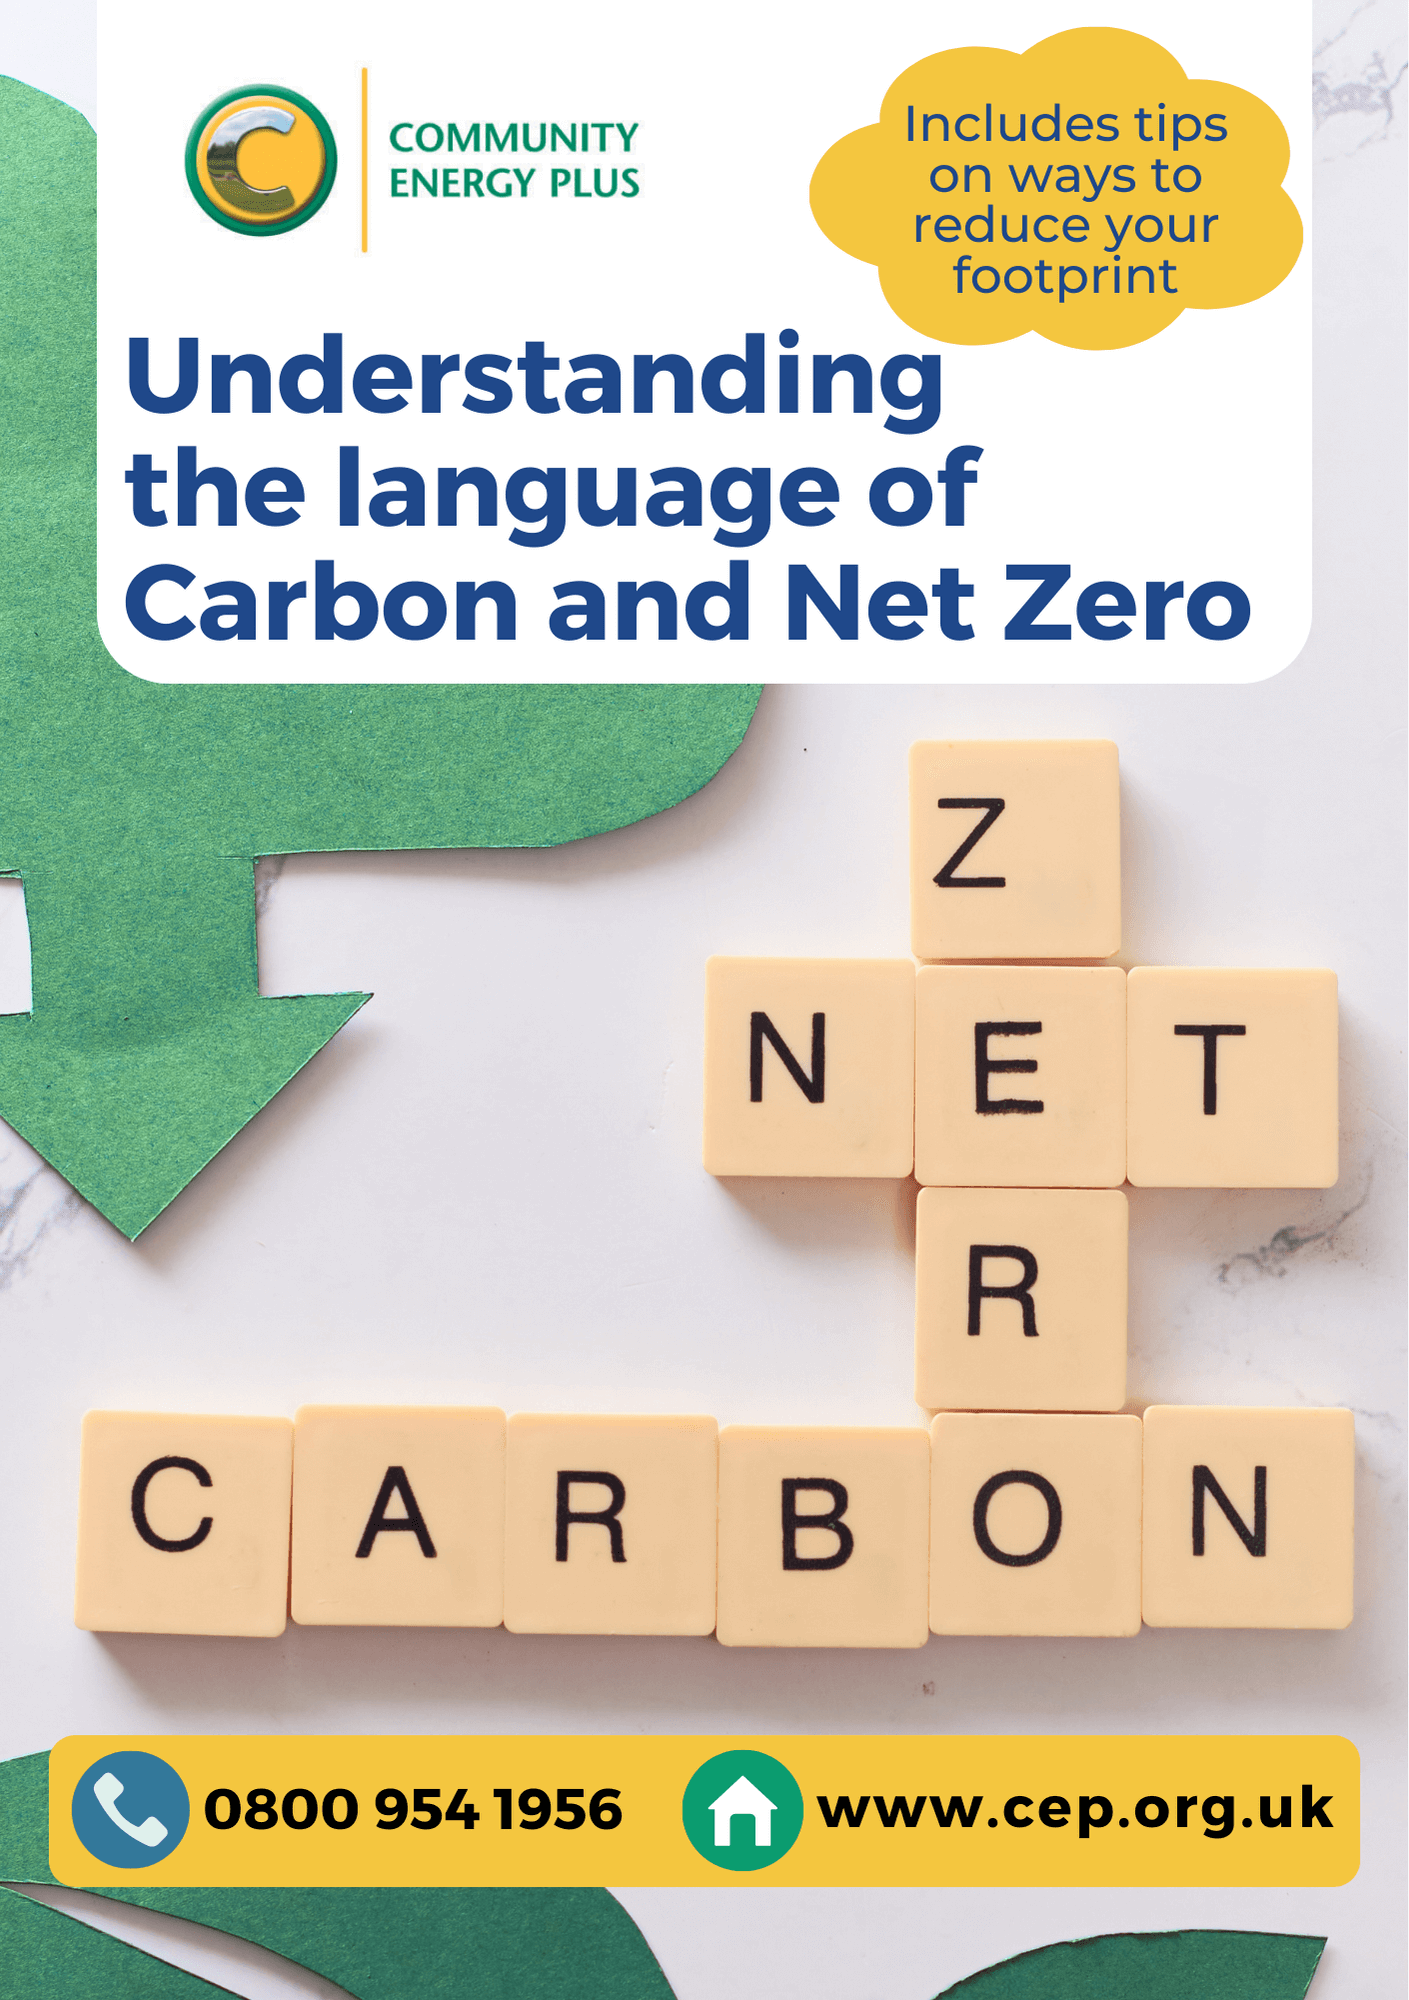 Click here for our simple guide to understanding the language of carbon and net zero